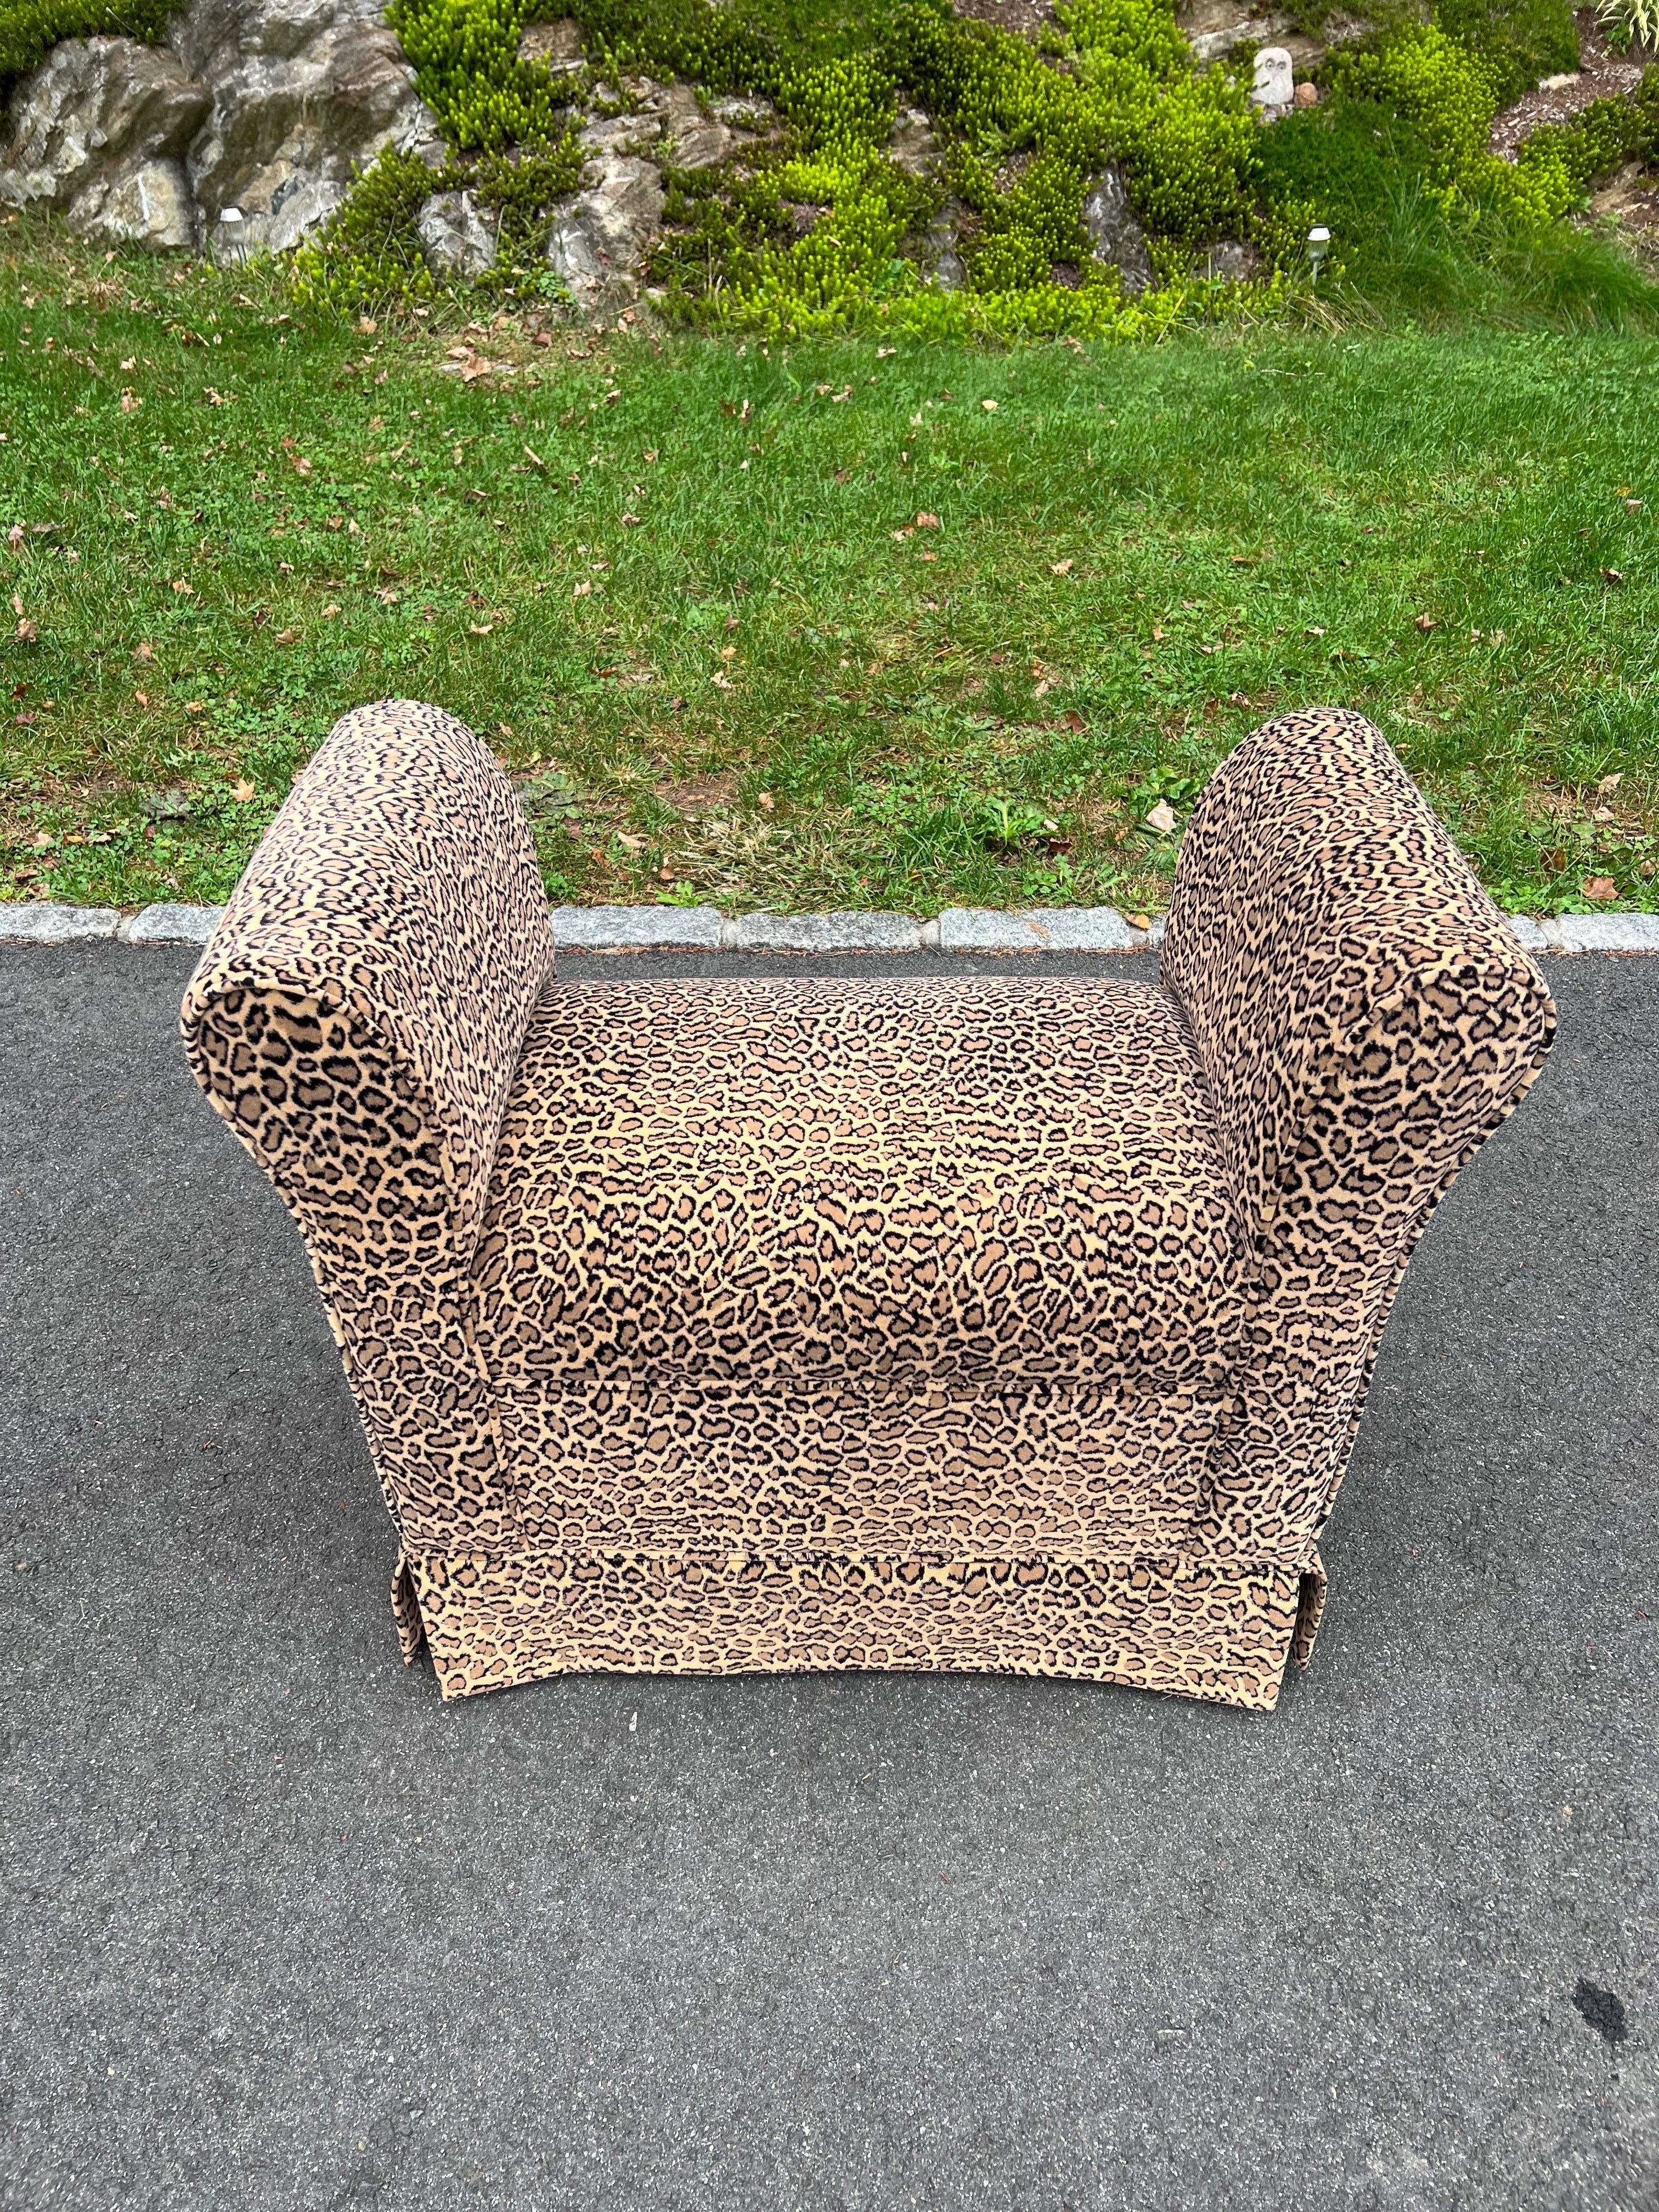 Leopard Patterned Upholstered Bench In Good Condition For Sale In Redding, CT